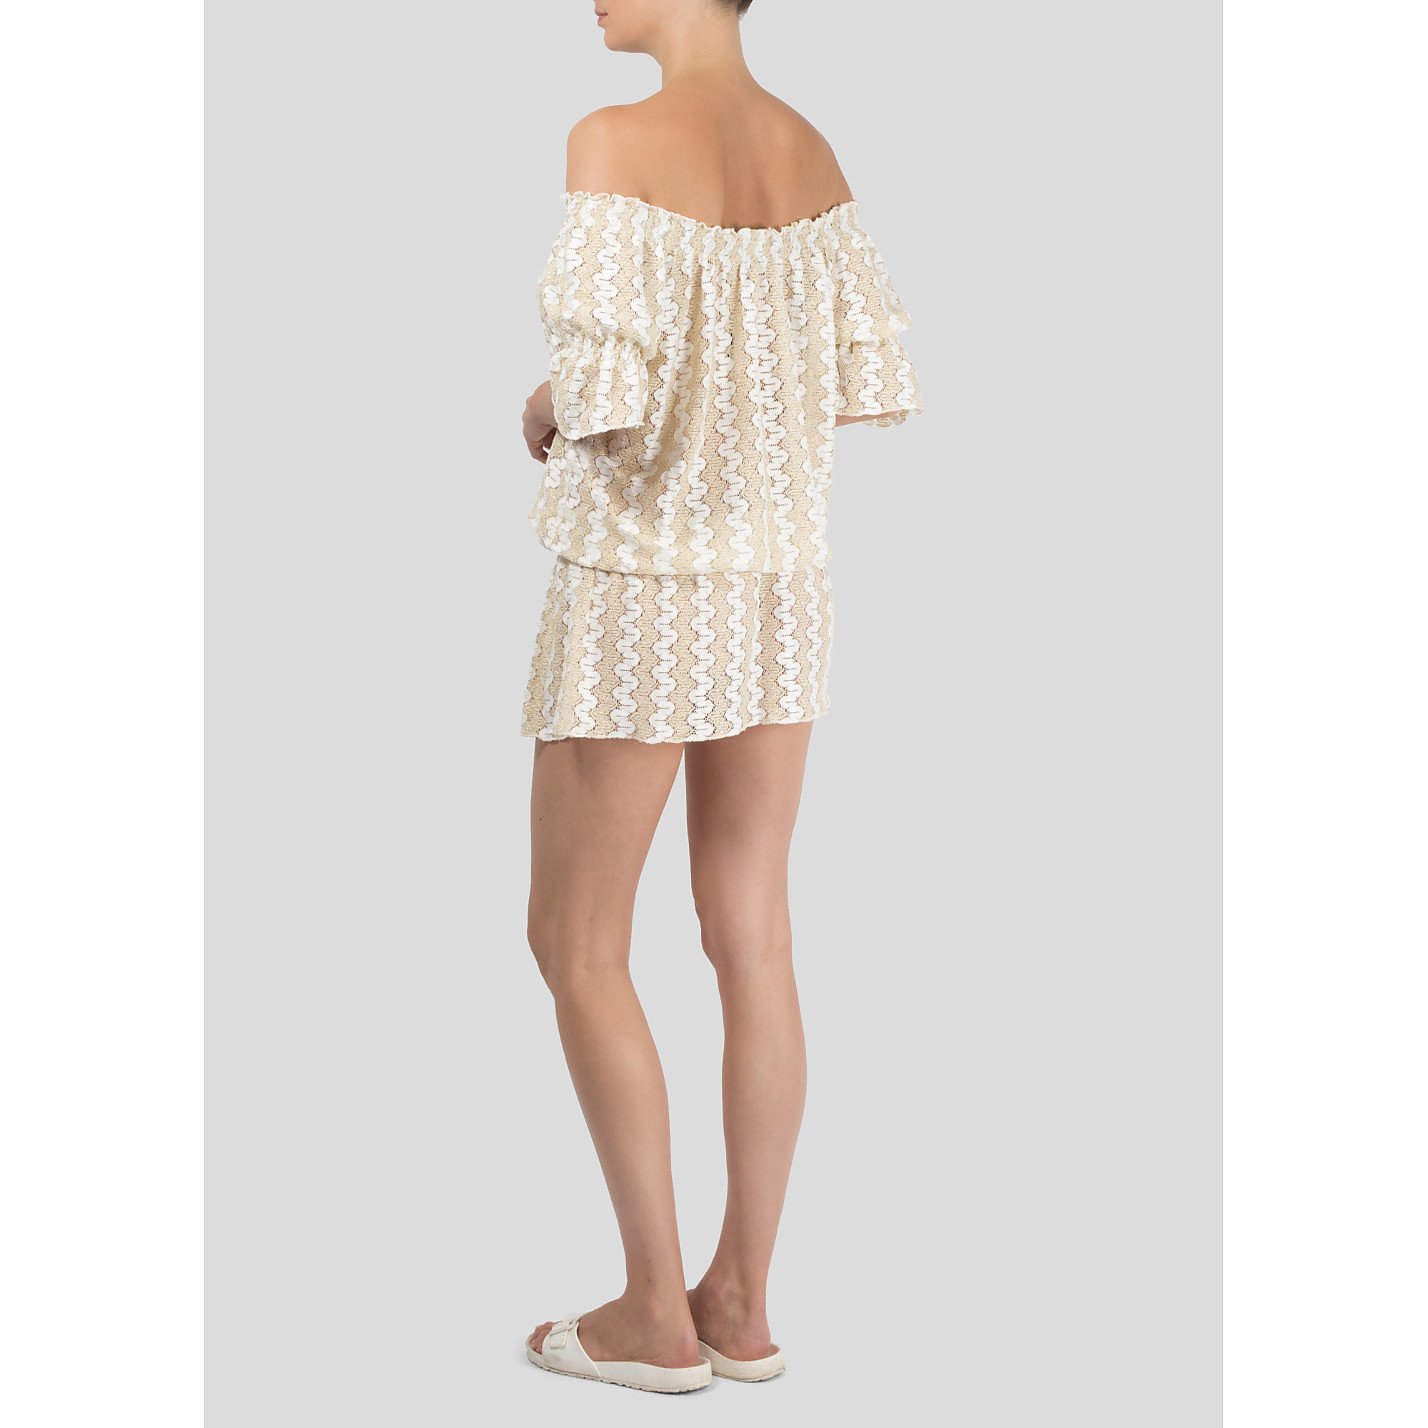 Rent Or Buy Melissa Odabash Beach Dress From 